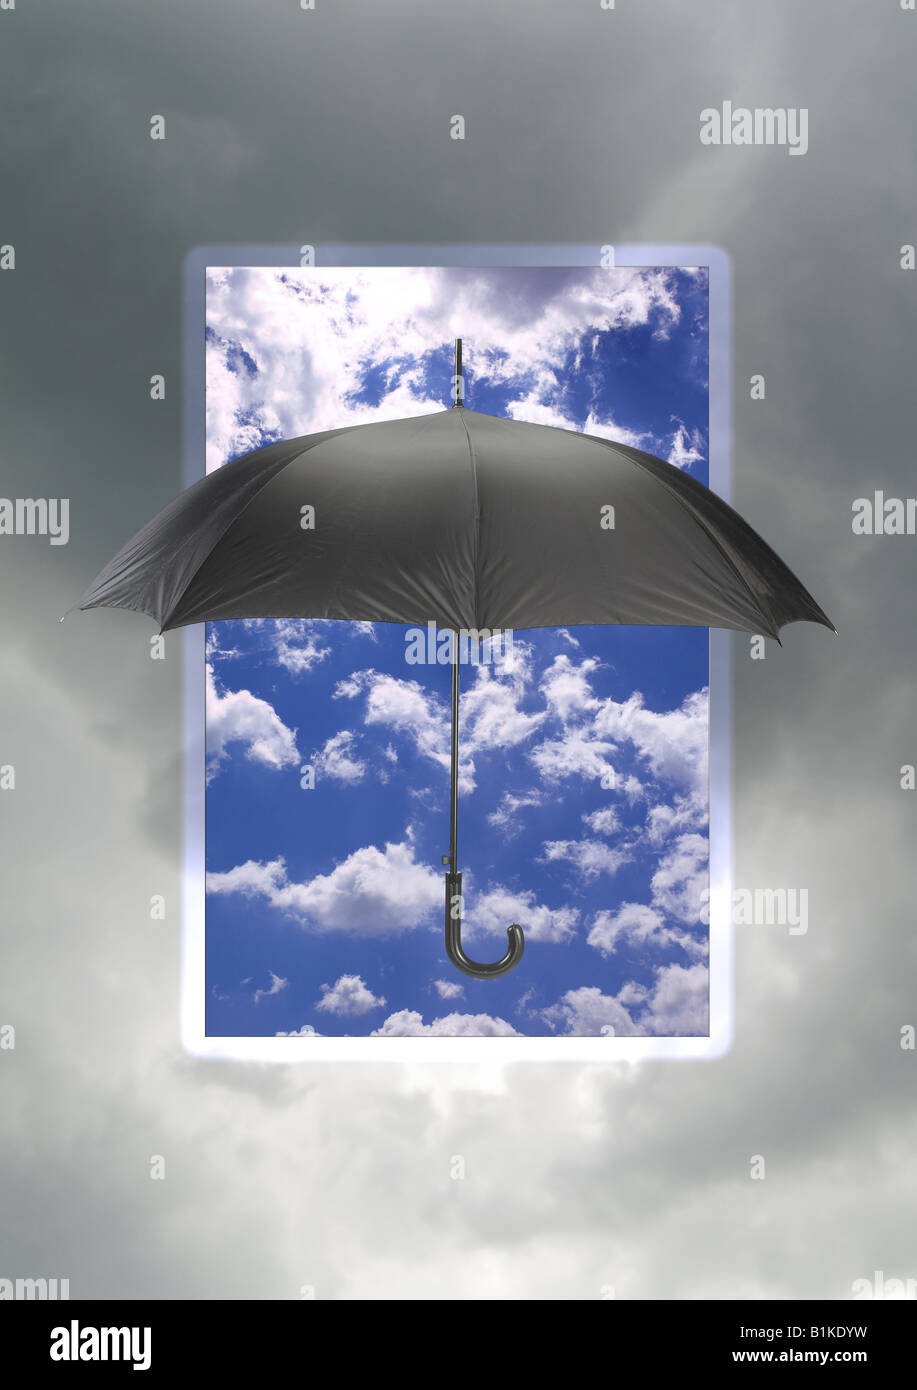 Umbrella With Dark Storm Clouds And Blue Sky Sunny Window Stock Photo